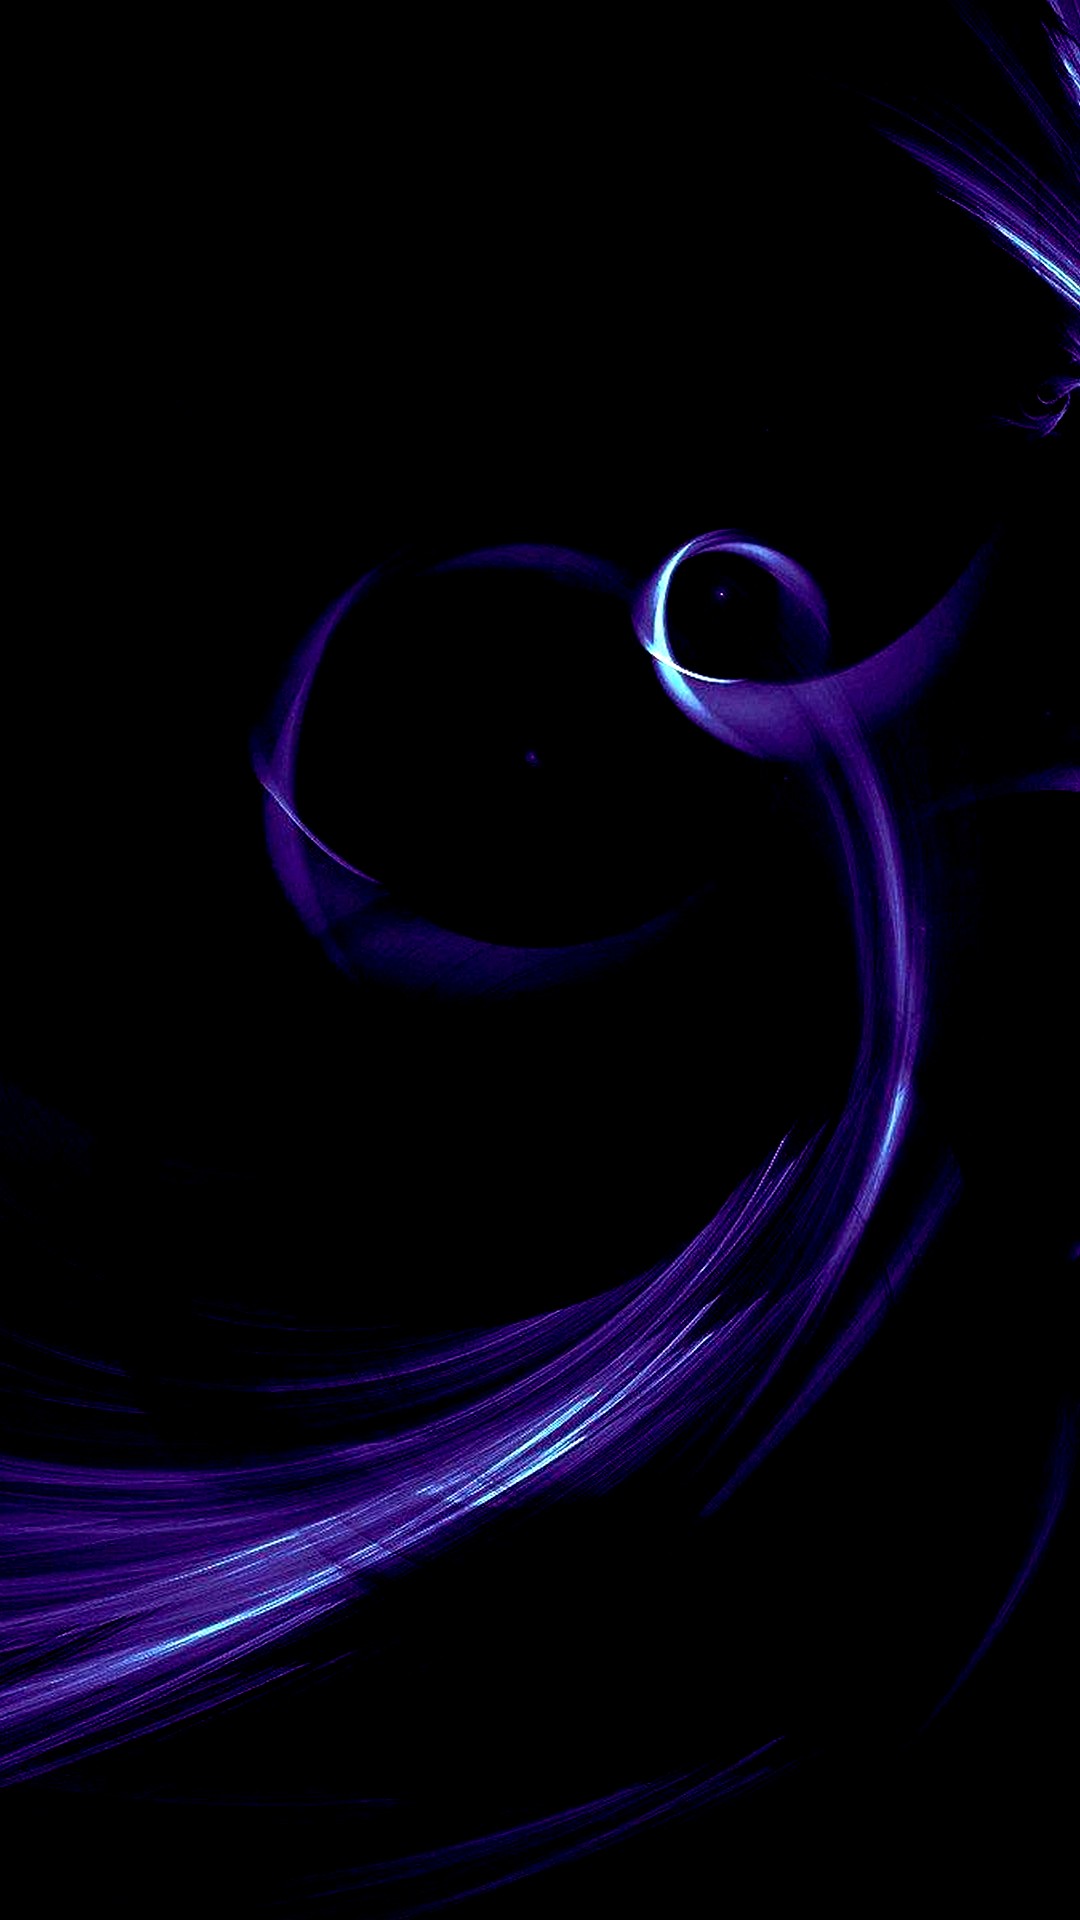 Neon Purple iPhone Wallpapers With high-resolution 1080X1920 pixel. You can use this wallpaper for your iPhone 5, 6, 7, 8, X, XS, XR backgrounds, Mobile Screensaver, or iPad Lock Screen